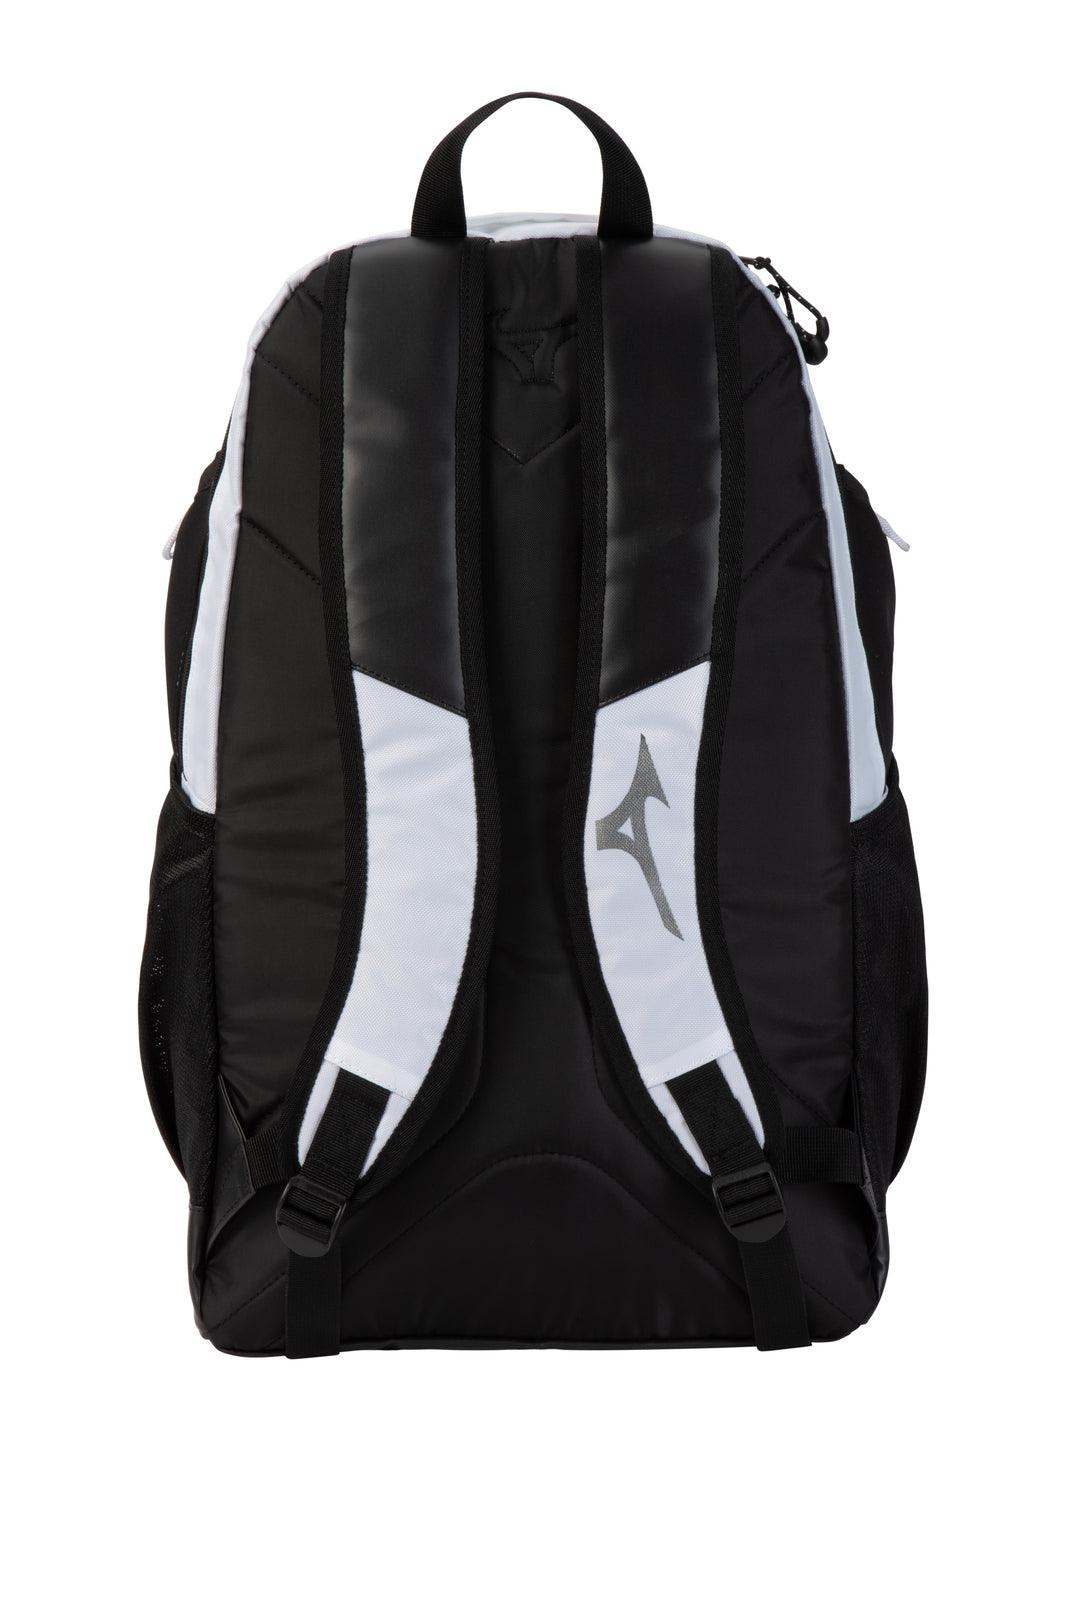 MVP Backpack X - Sports Excellence